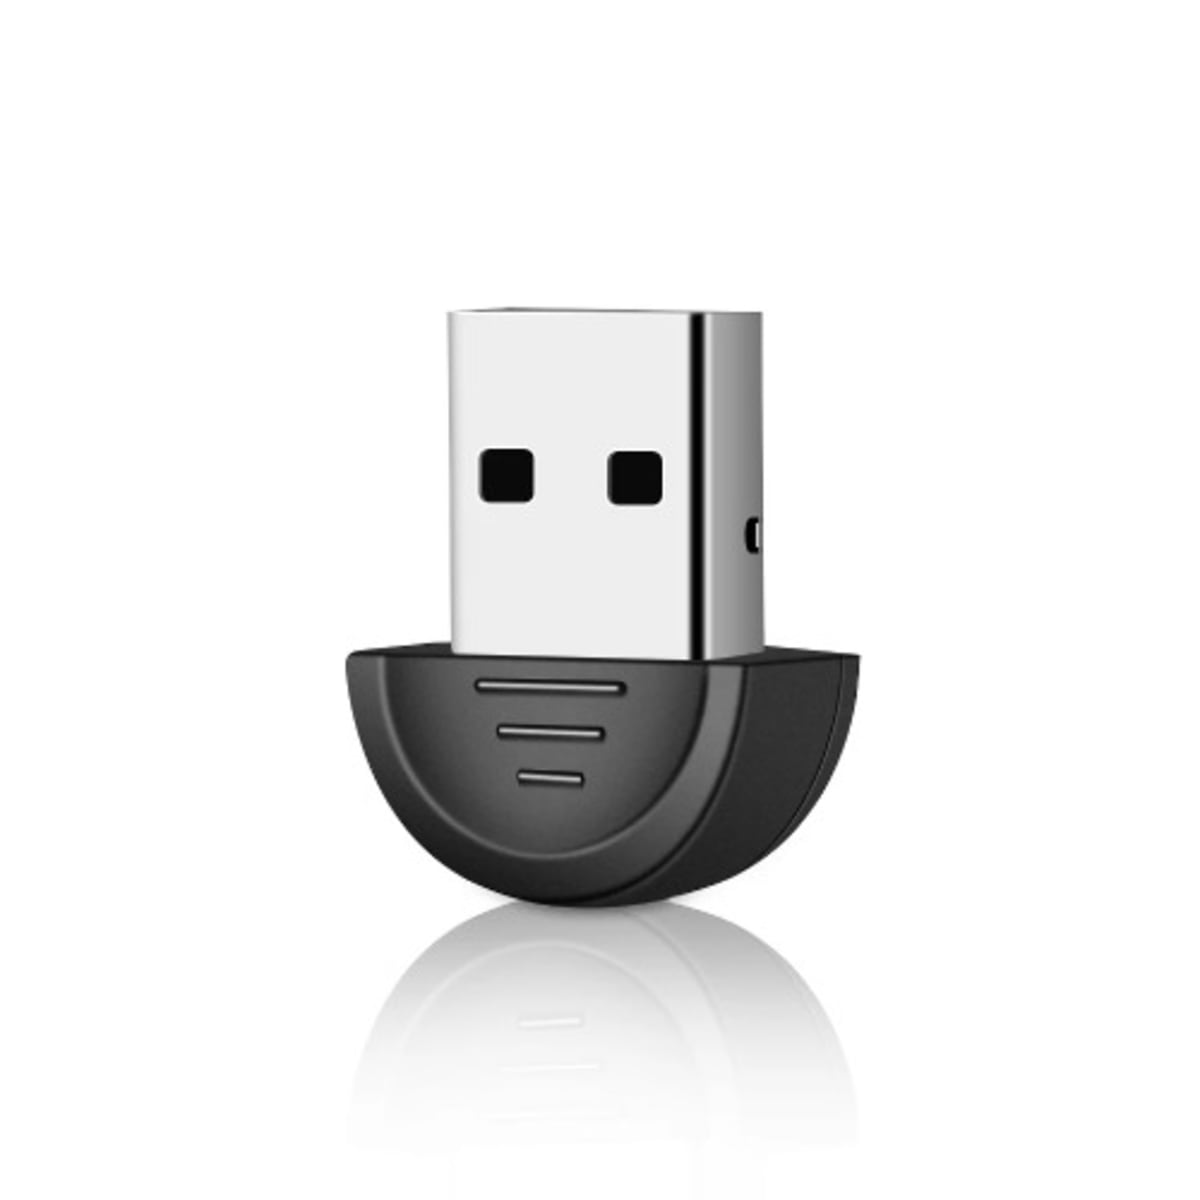 Mini Wireless Bluetooth Usb 2.0 Adapter Dongle For Pc Laptop And Desktop